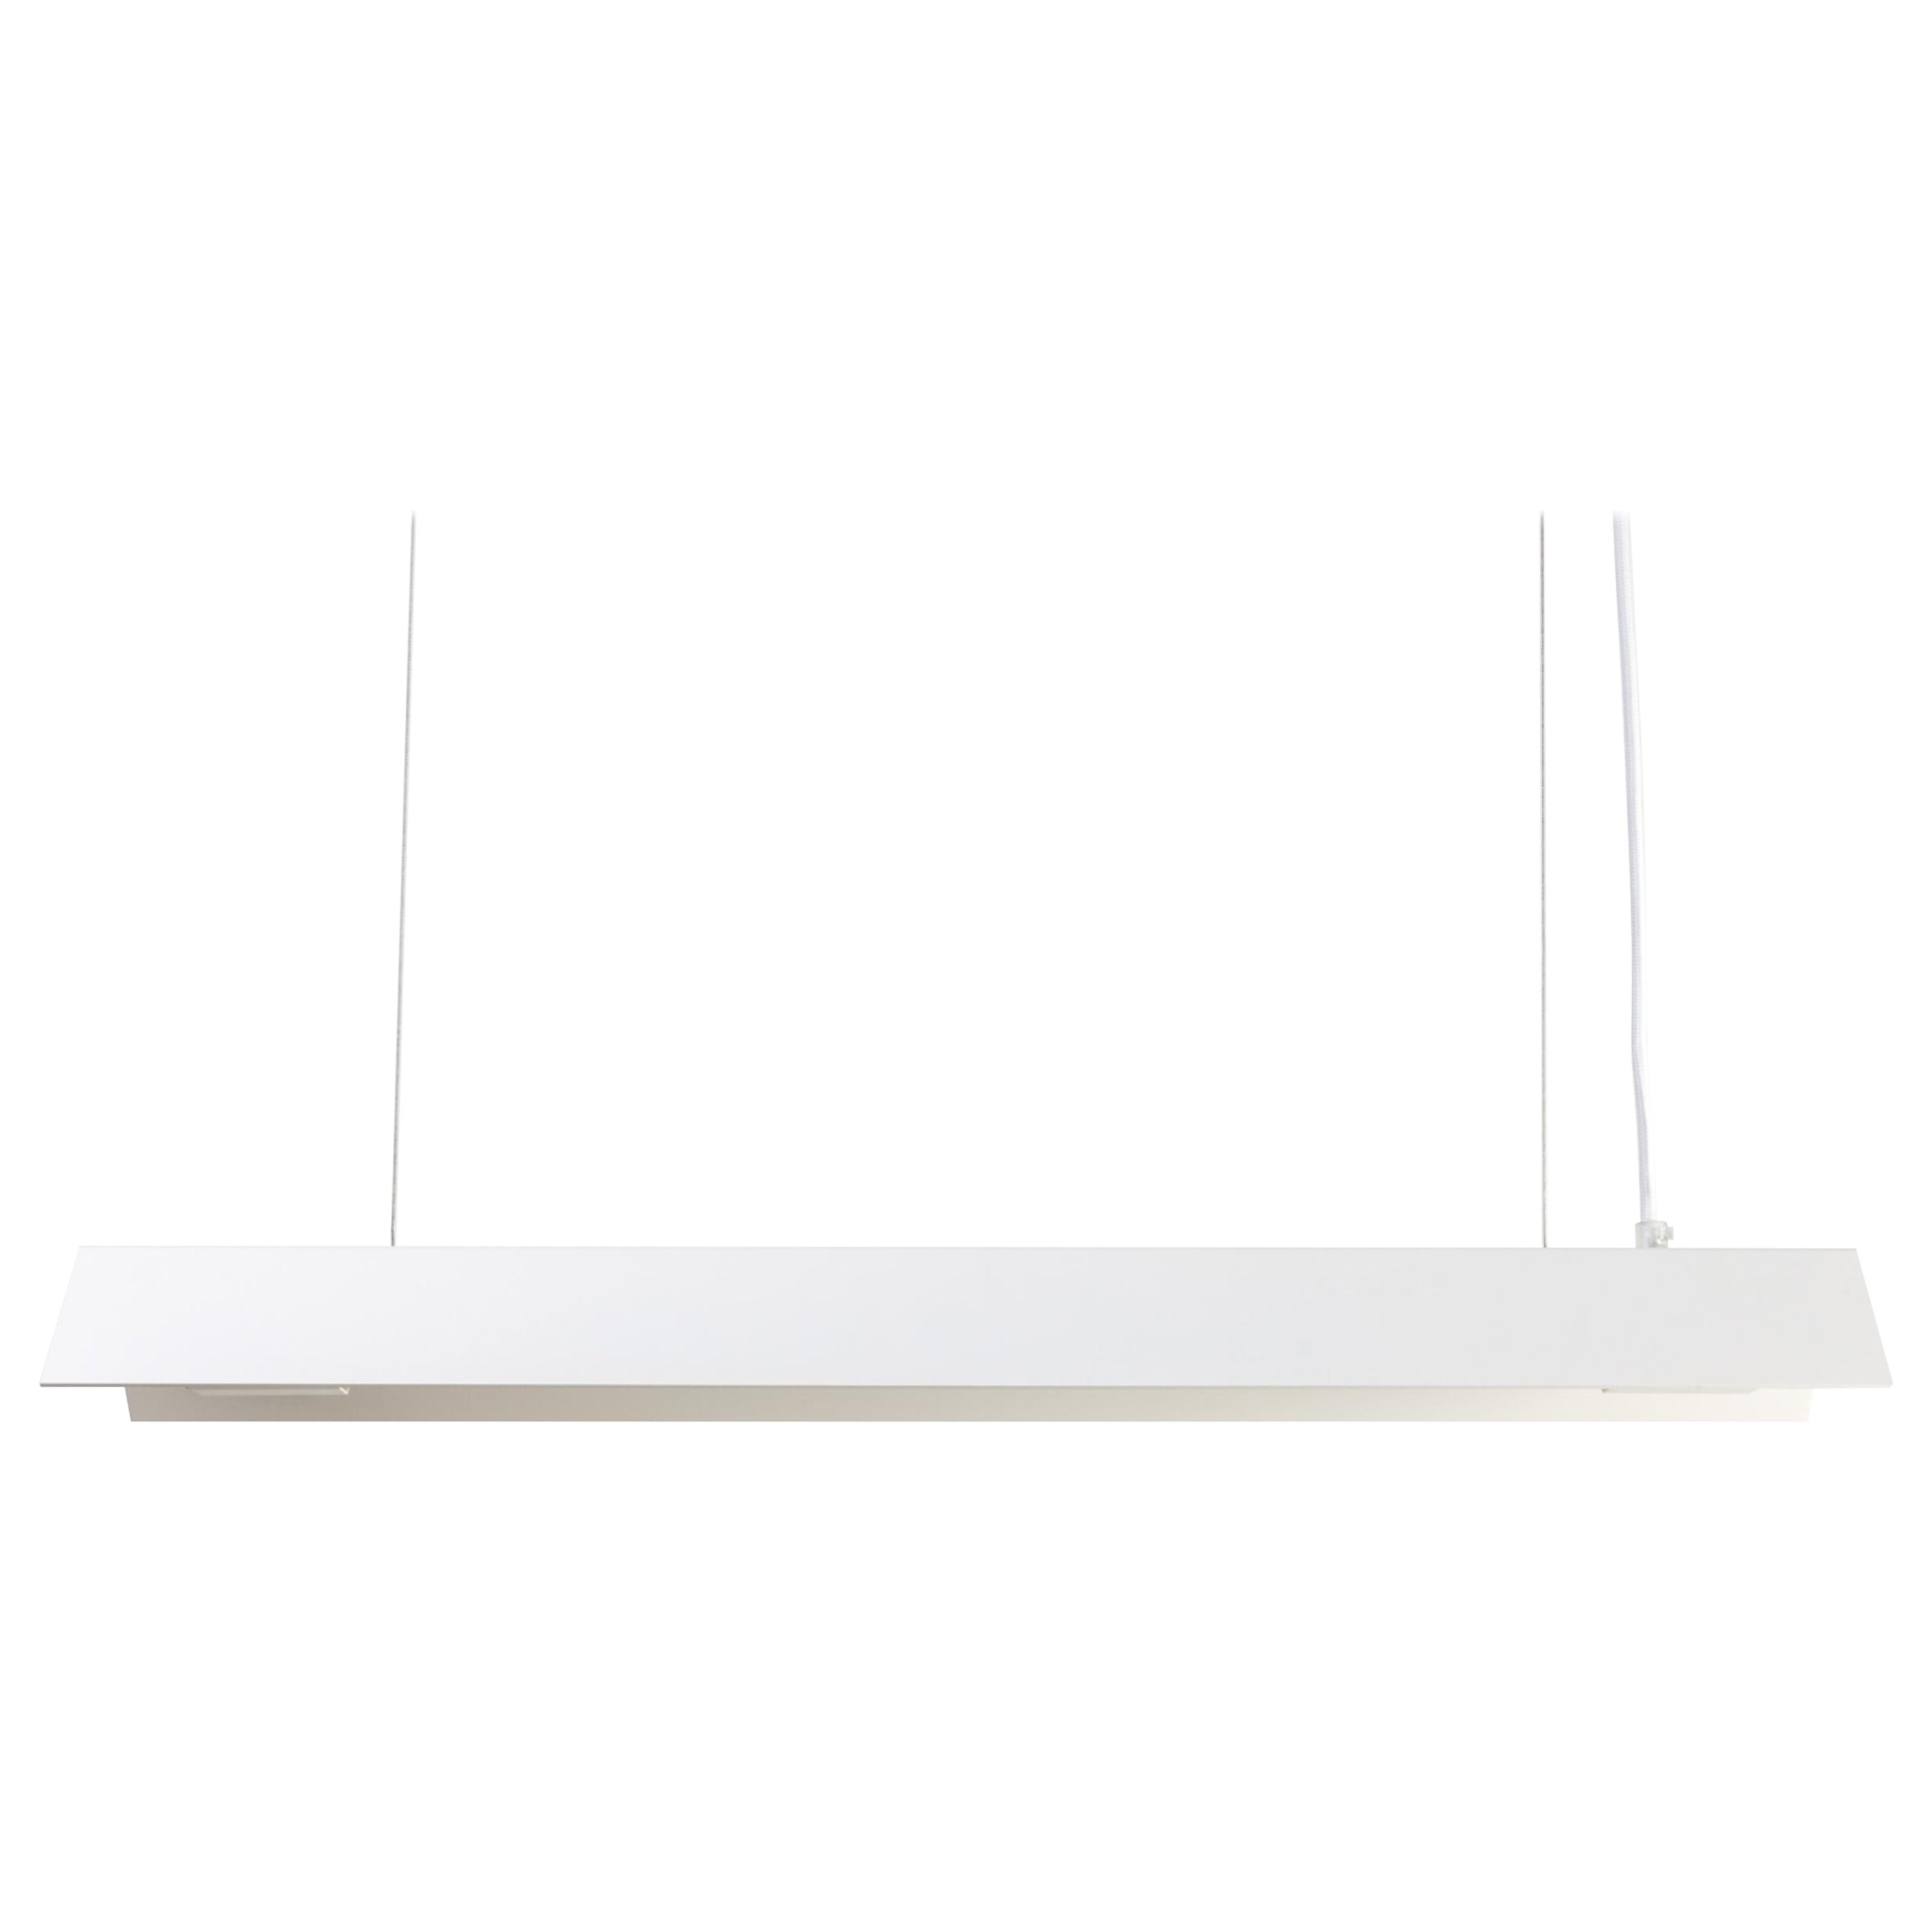 Small Misalliance Ral Pure White Suspended Light by Lexavala For Sale